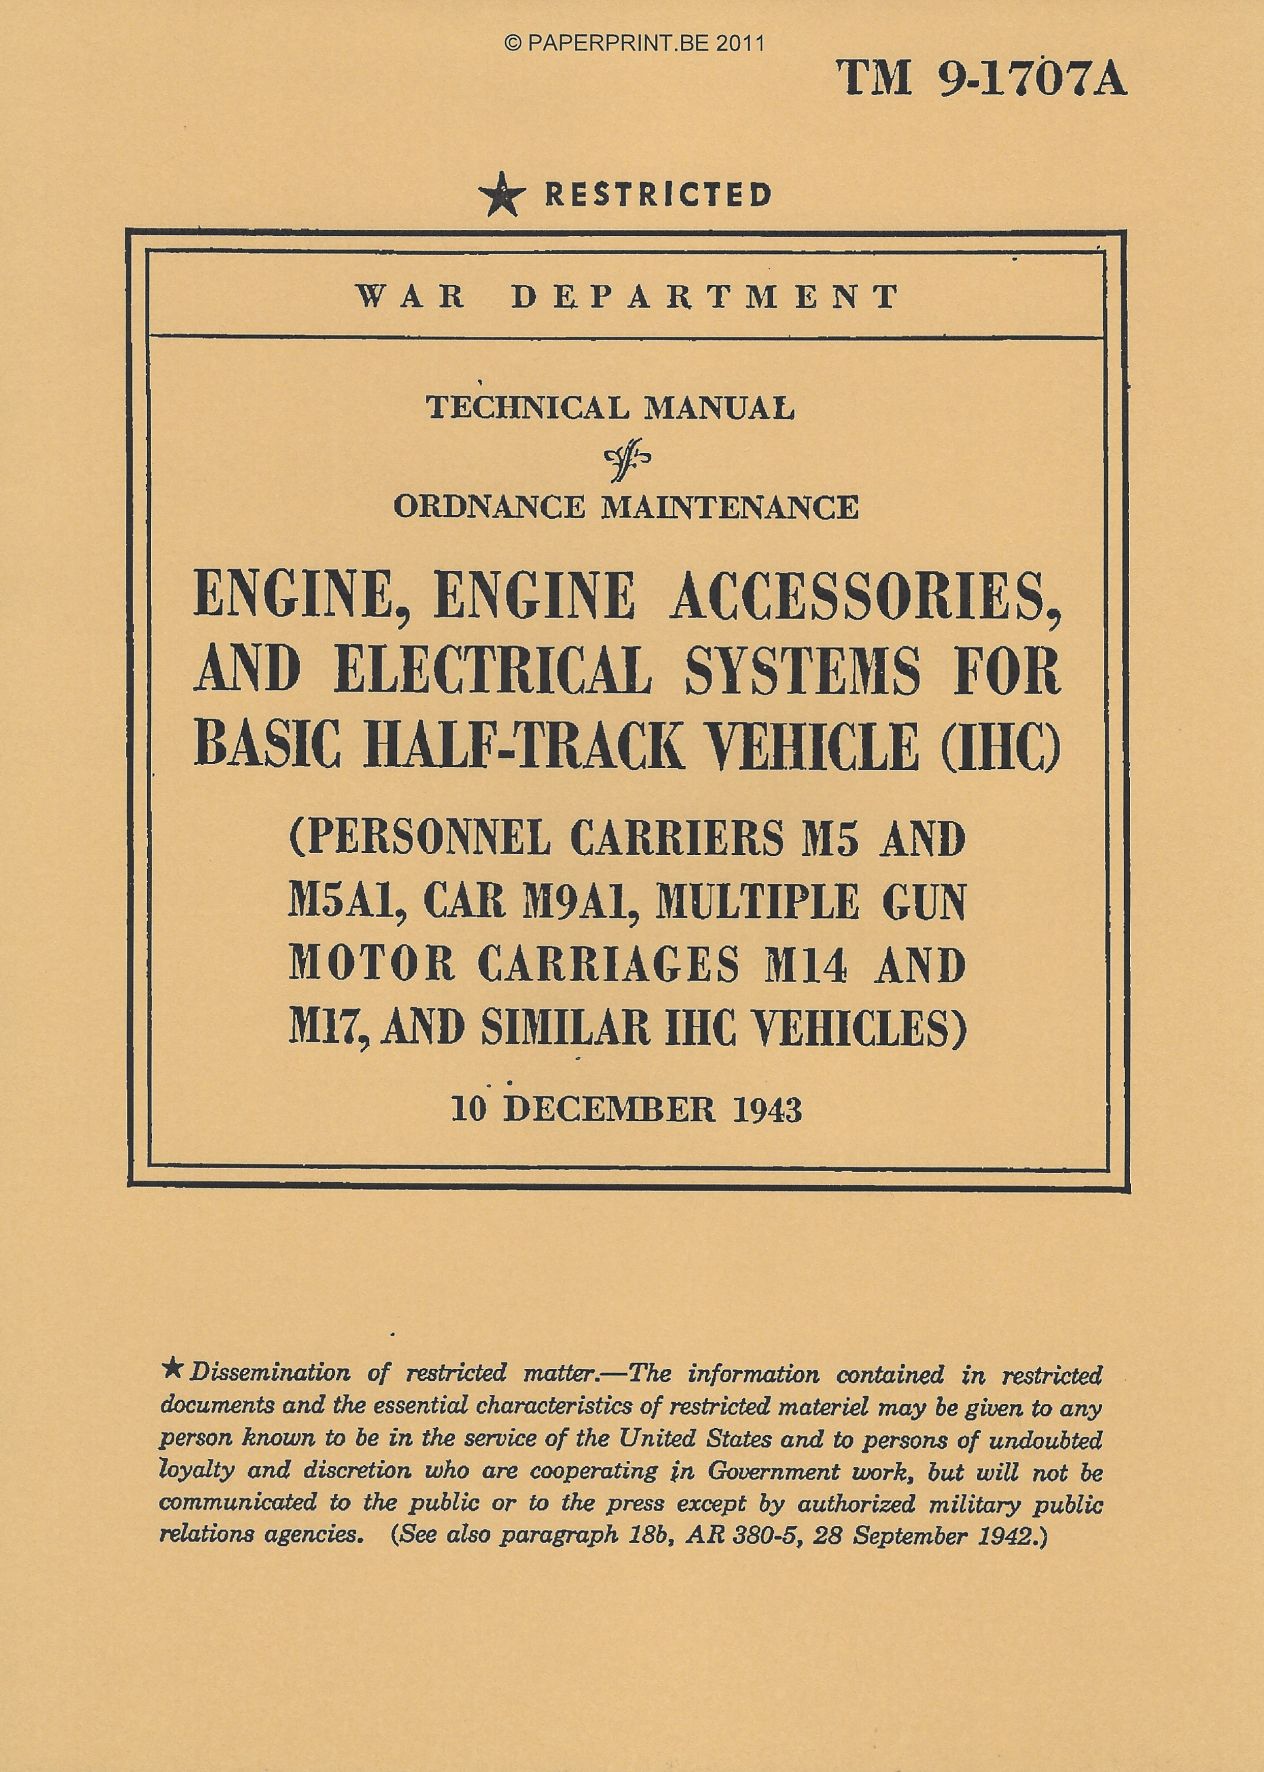 TM 9-1707A US ENGINE, ENGINE ACCESSORIES, AND ELECTRICAL SYSTEMS FOR BASIC HALF-TRACK VEHICLE (IHC)